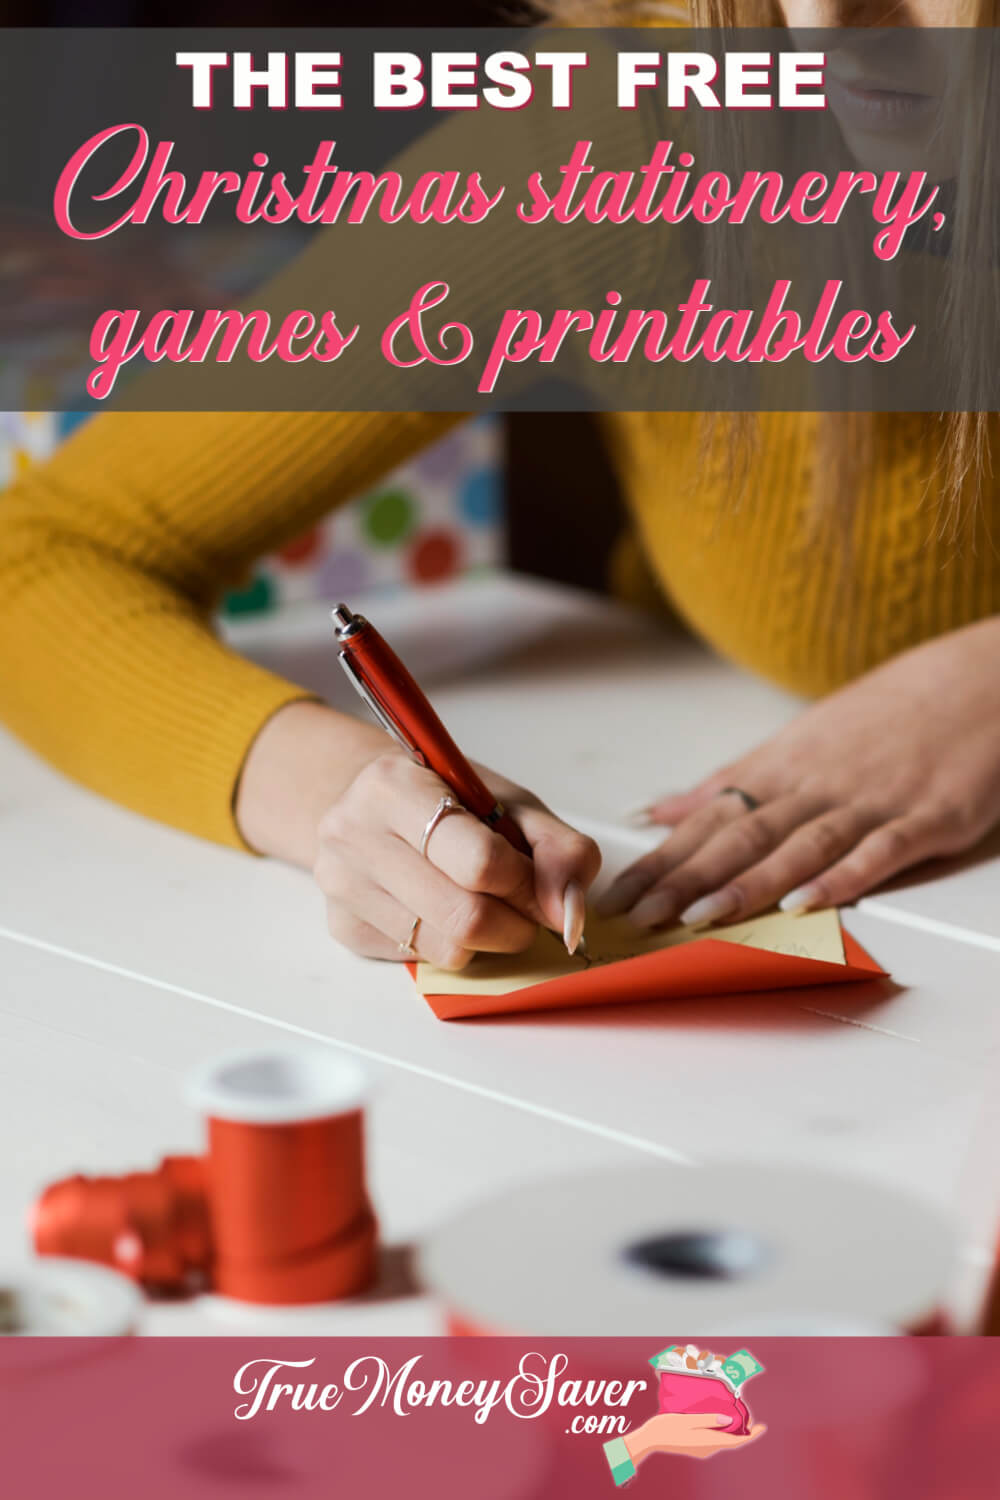 The Best FREE Christmas Stationery, Games & Printables